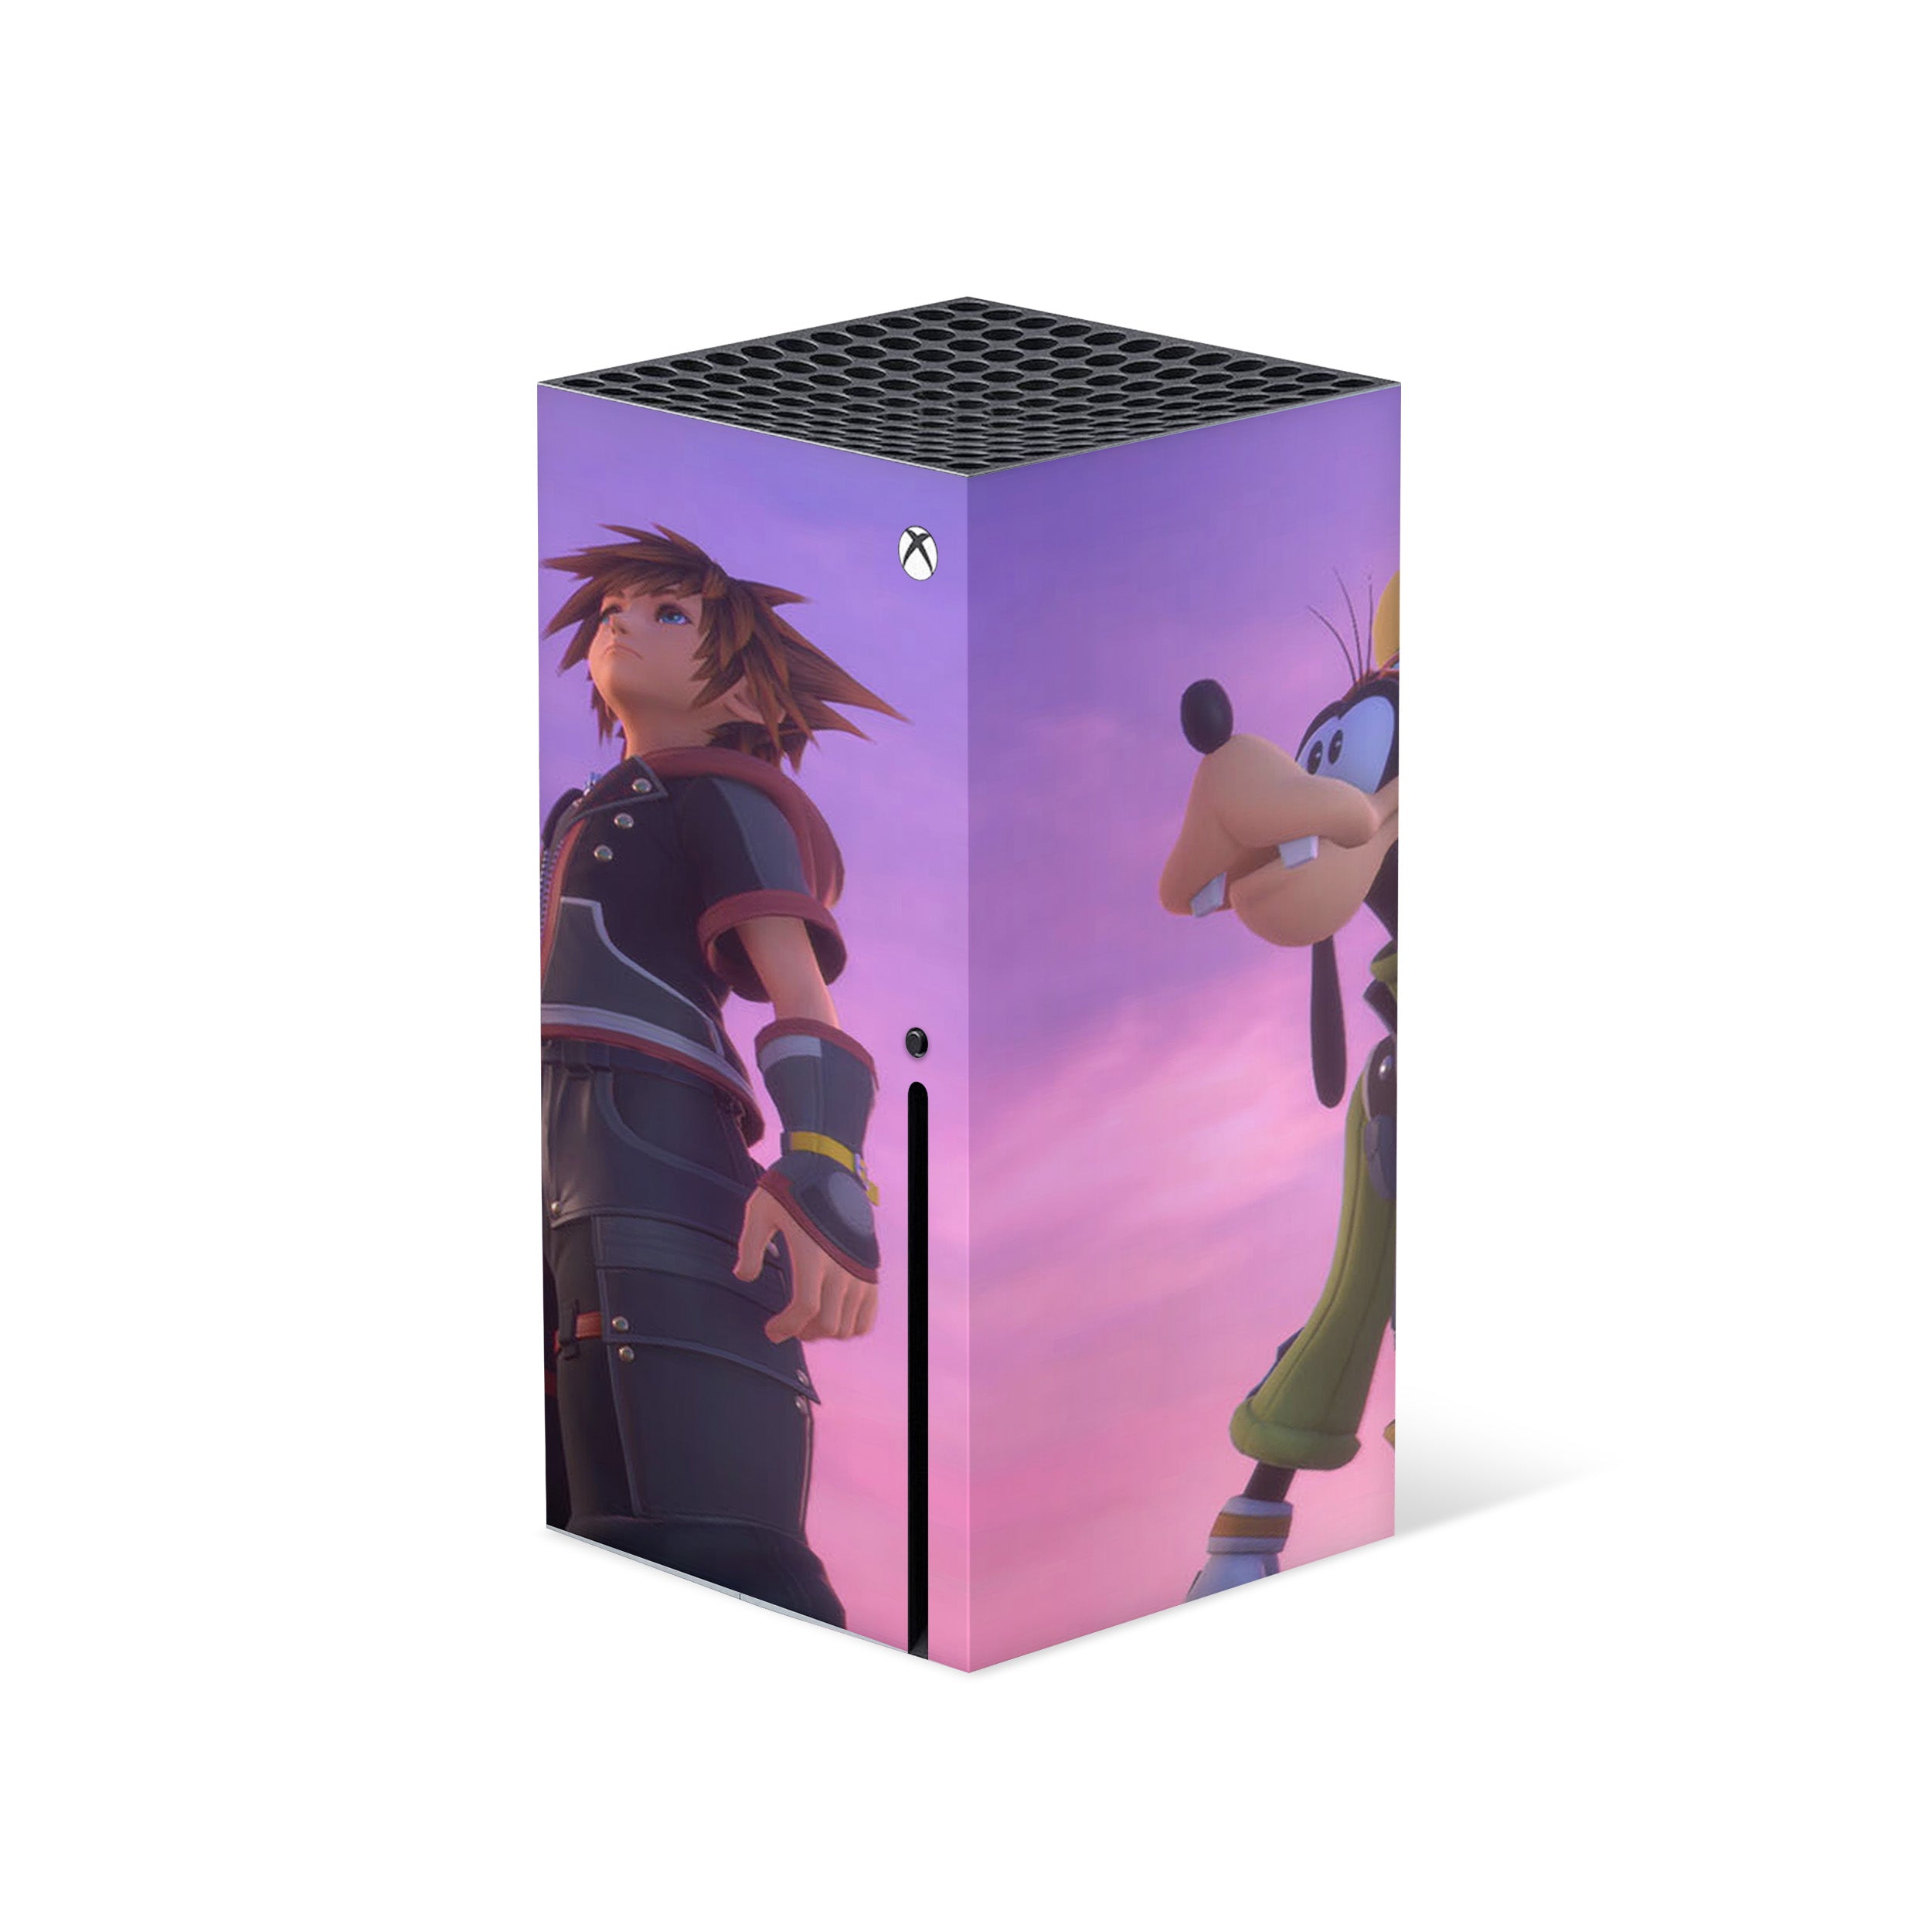 A video game skin featuring a Kingdom Hearts design for the Xbox Series X.